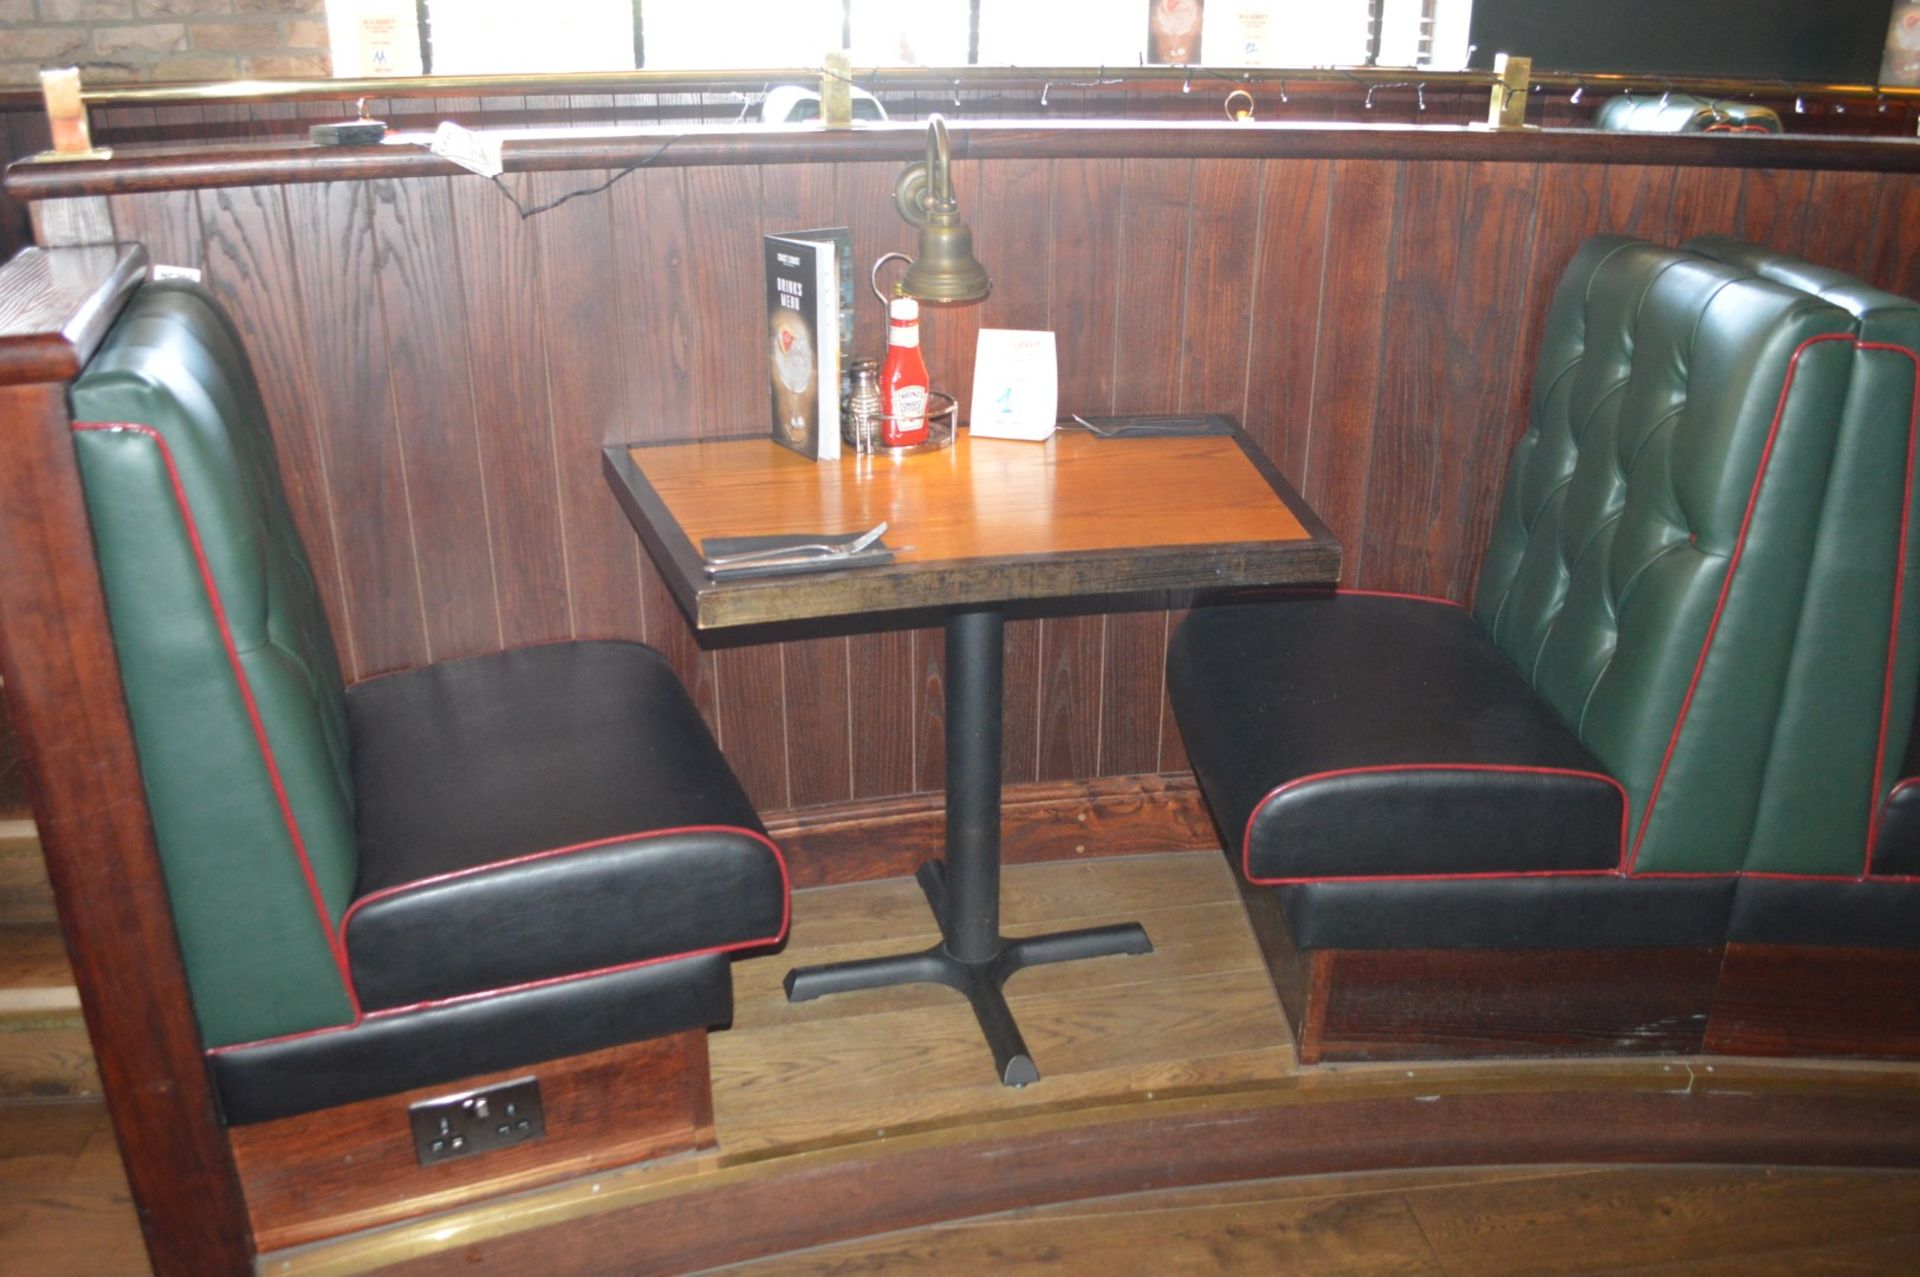 4 x Sections of Restaurant Booth Seating - Include 2 x Single Seats and 2 x Single Back to Back Seat - Image 7 of 12